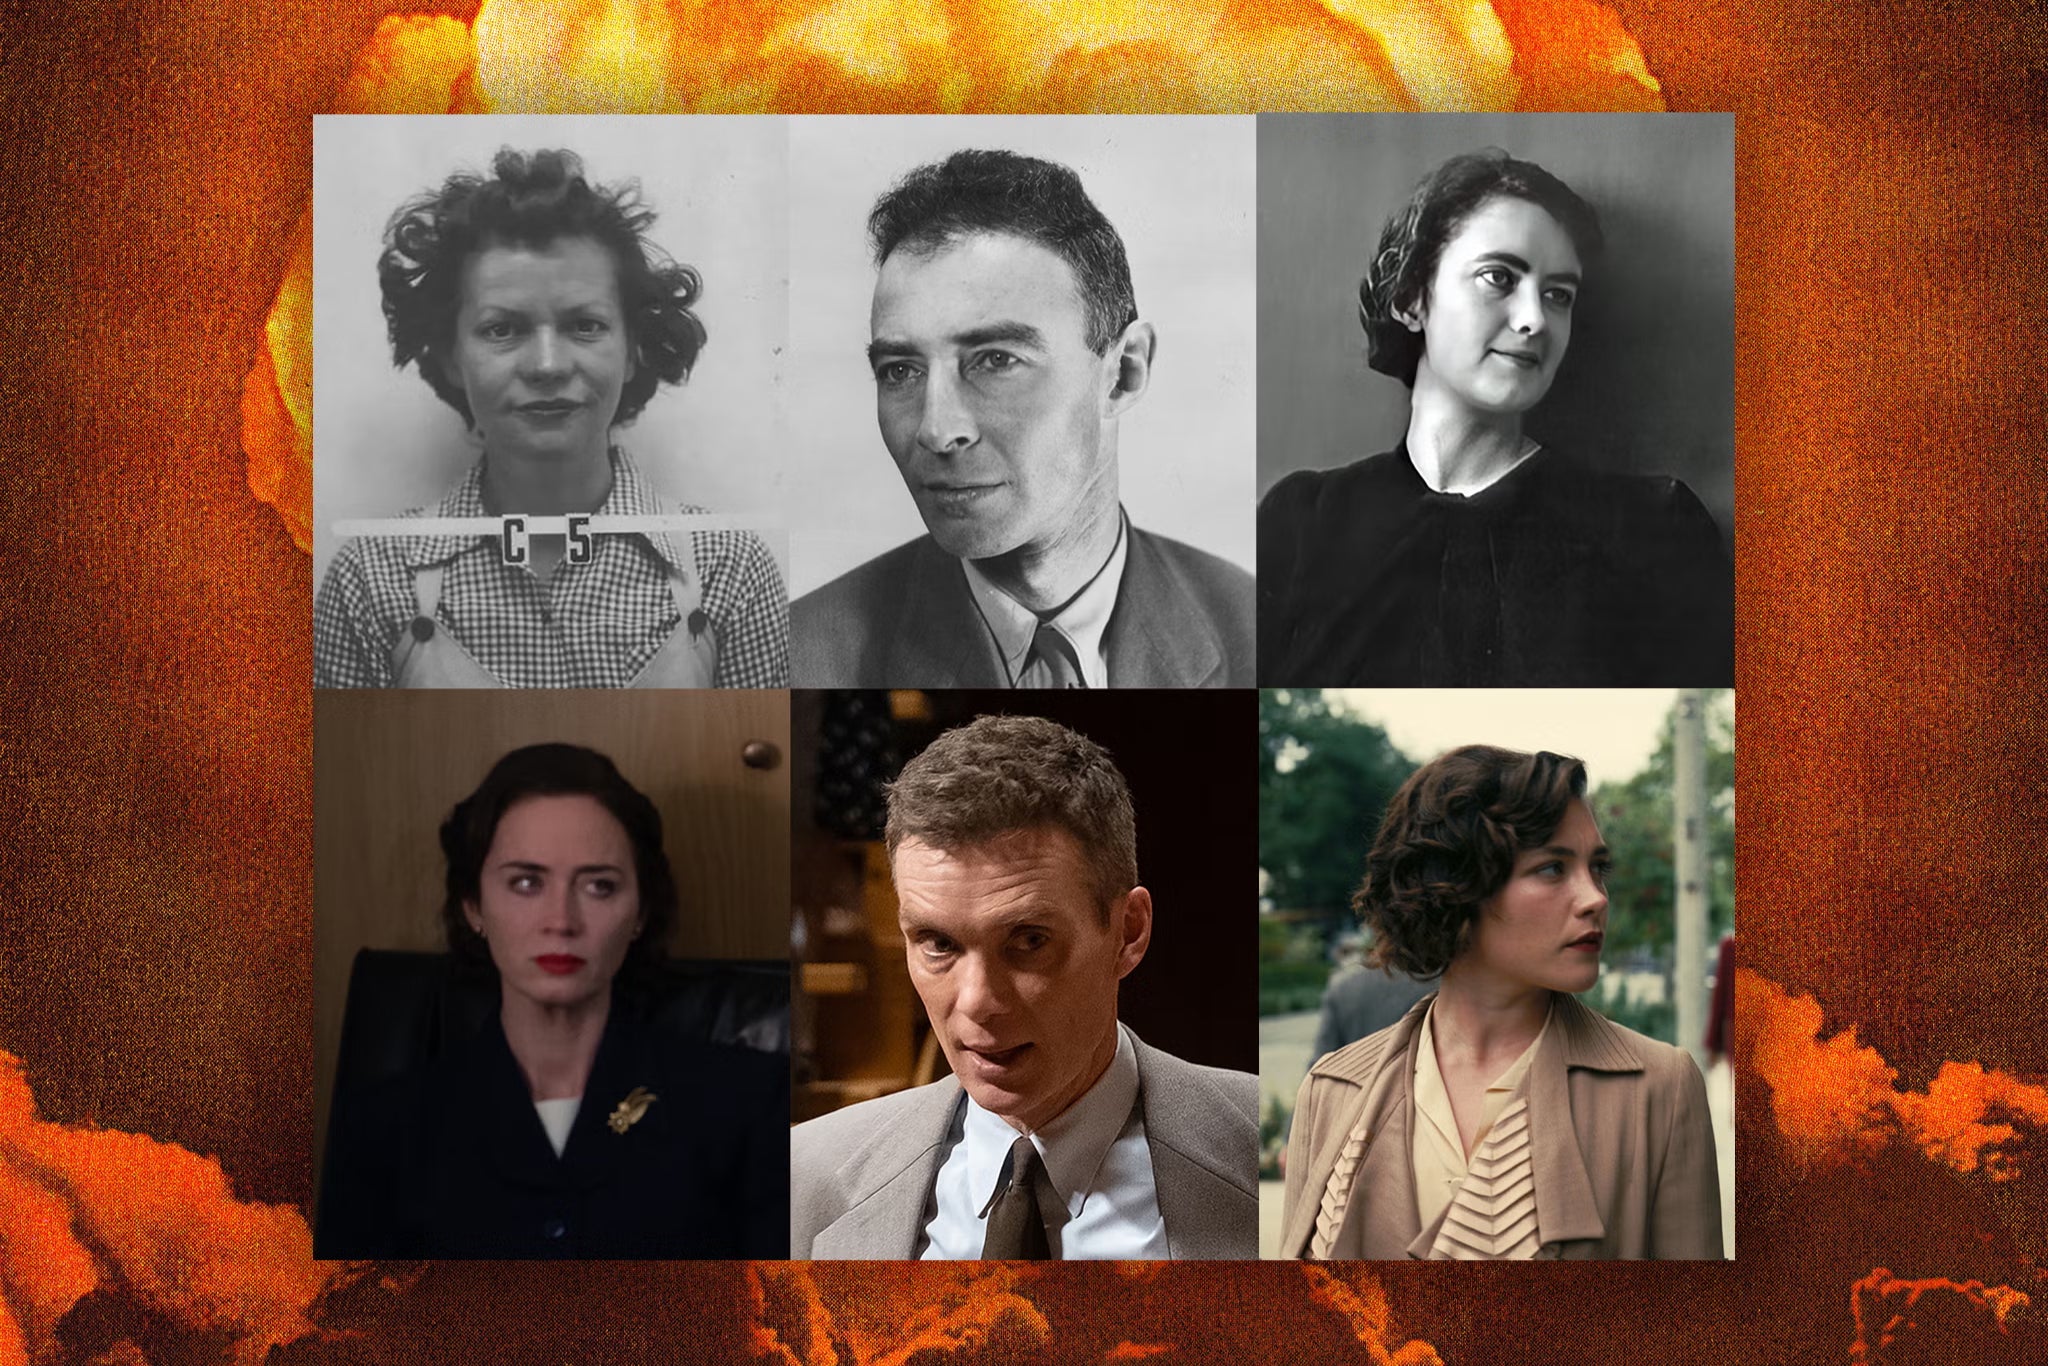 Cillian Murphy plays J Robert Oppenheimer, with Emily Blunt as his wife, Kitty, and Florence Pugh as his lover, Jean Tatlock